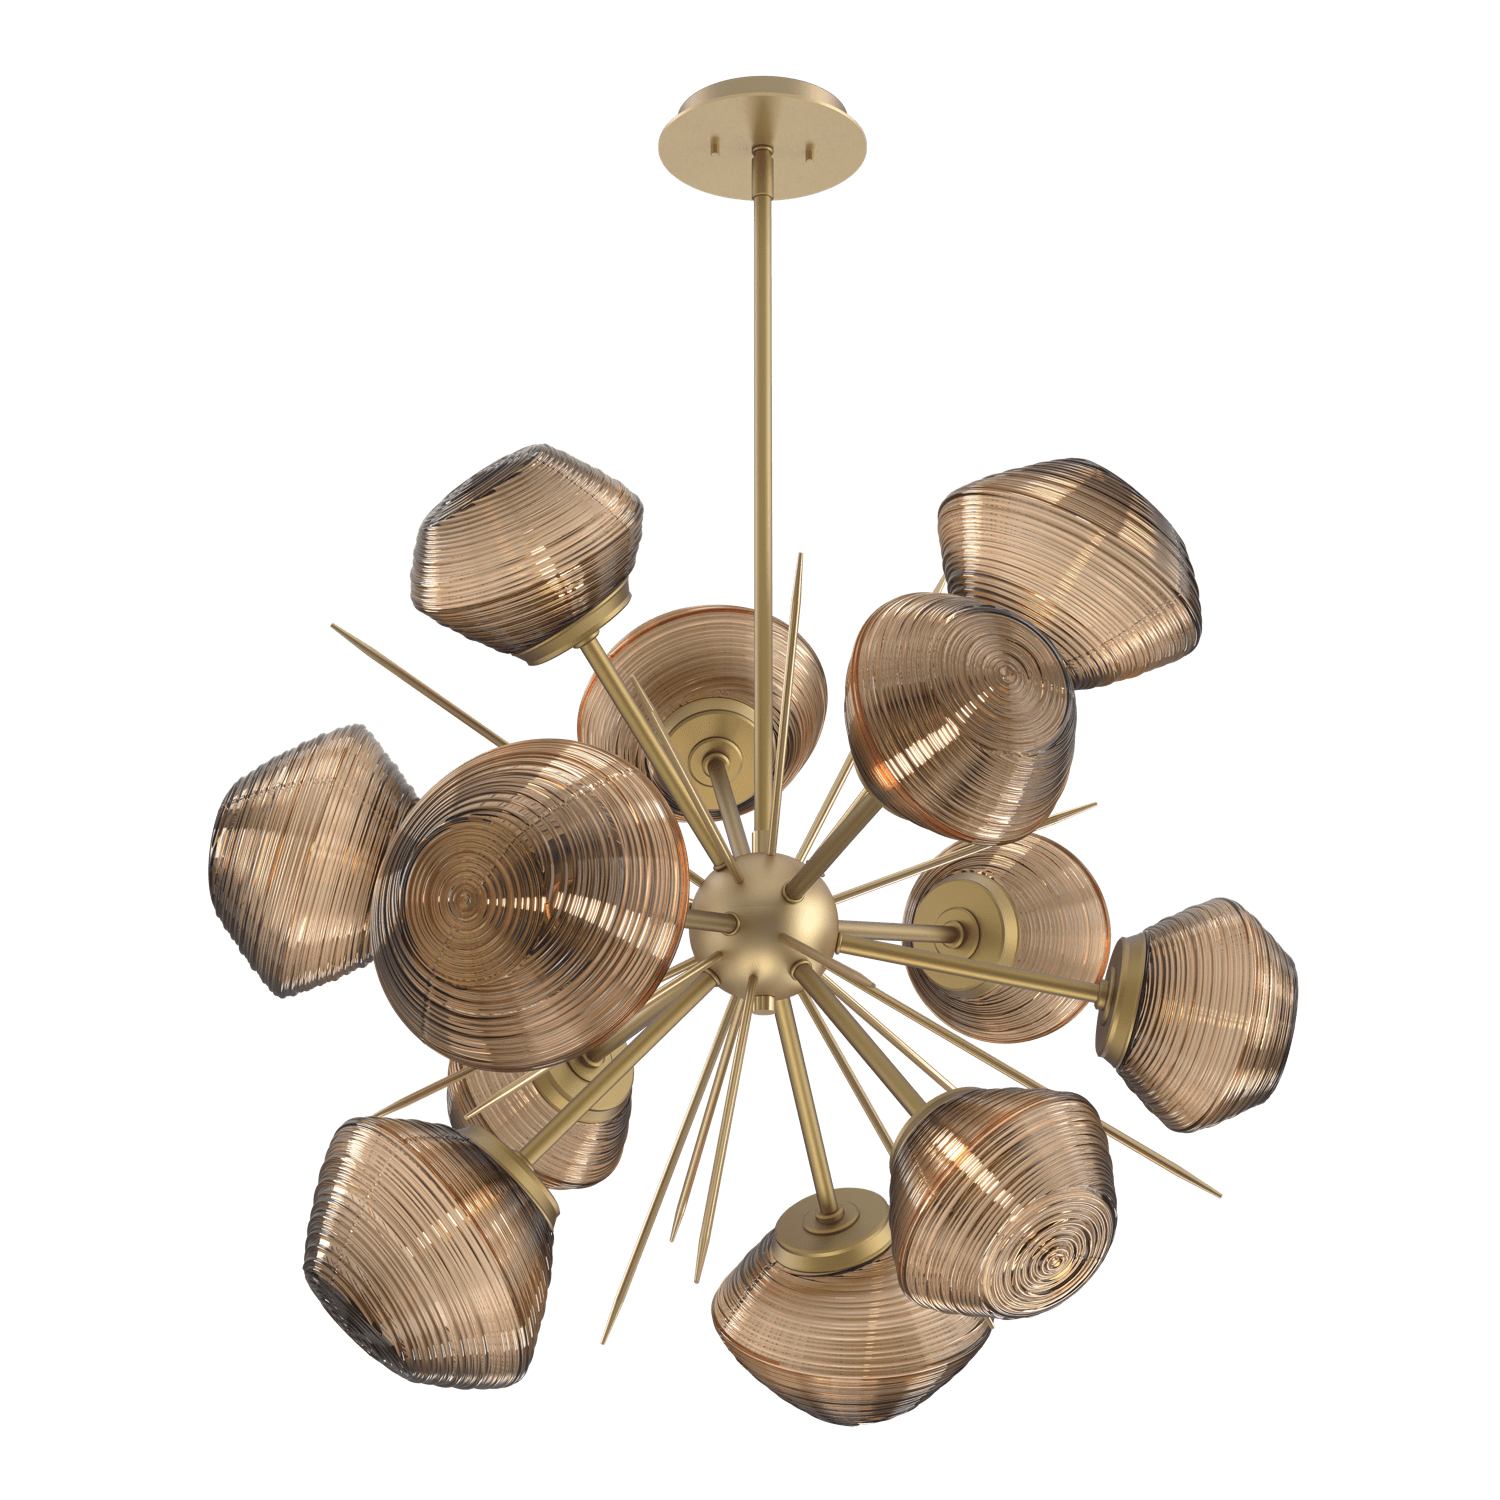 CHB0089-0G-GB-B-Hammerton-Studio-Mesa-36-inch-starburst-chandelier-with-gilded-brass-finish-and-bronze-blown-glass-shades-and-LED-lamping